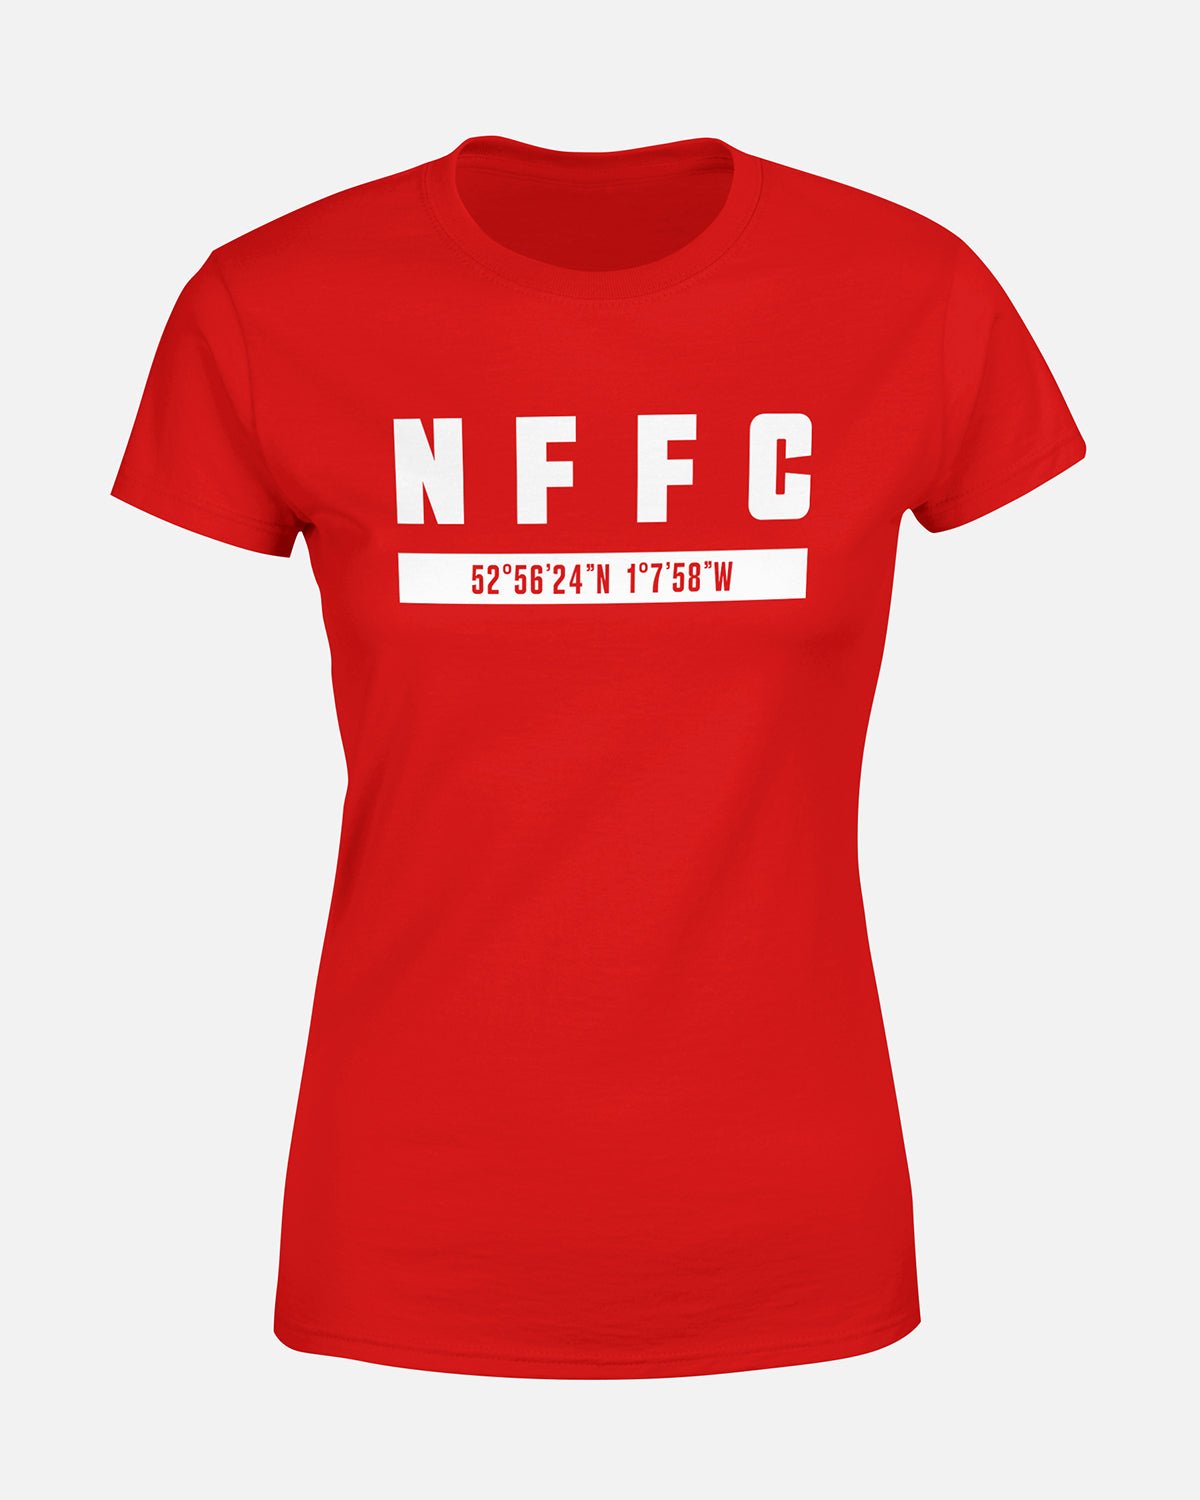 NFFC Women's Red Co-ordinates Tee - Nottingham Forest FC